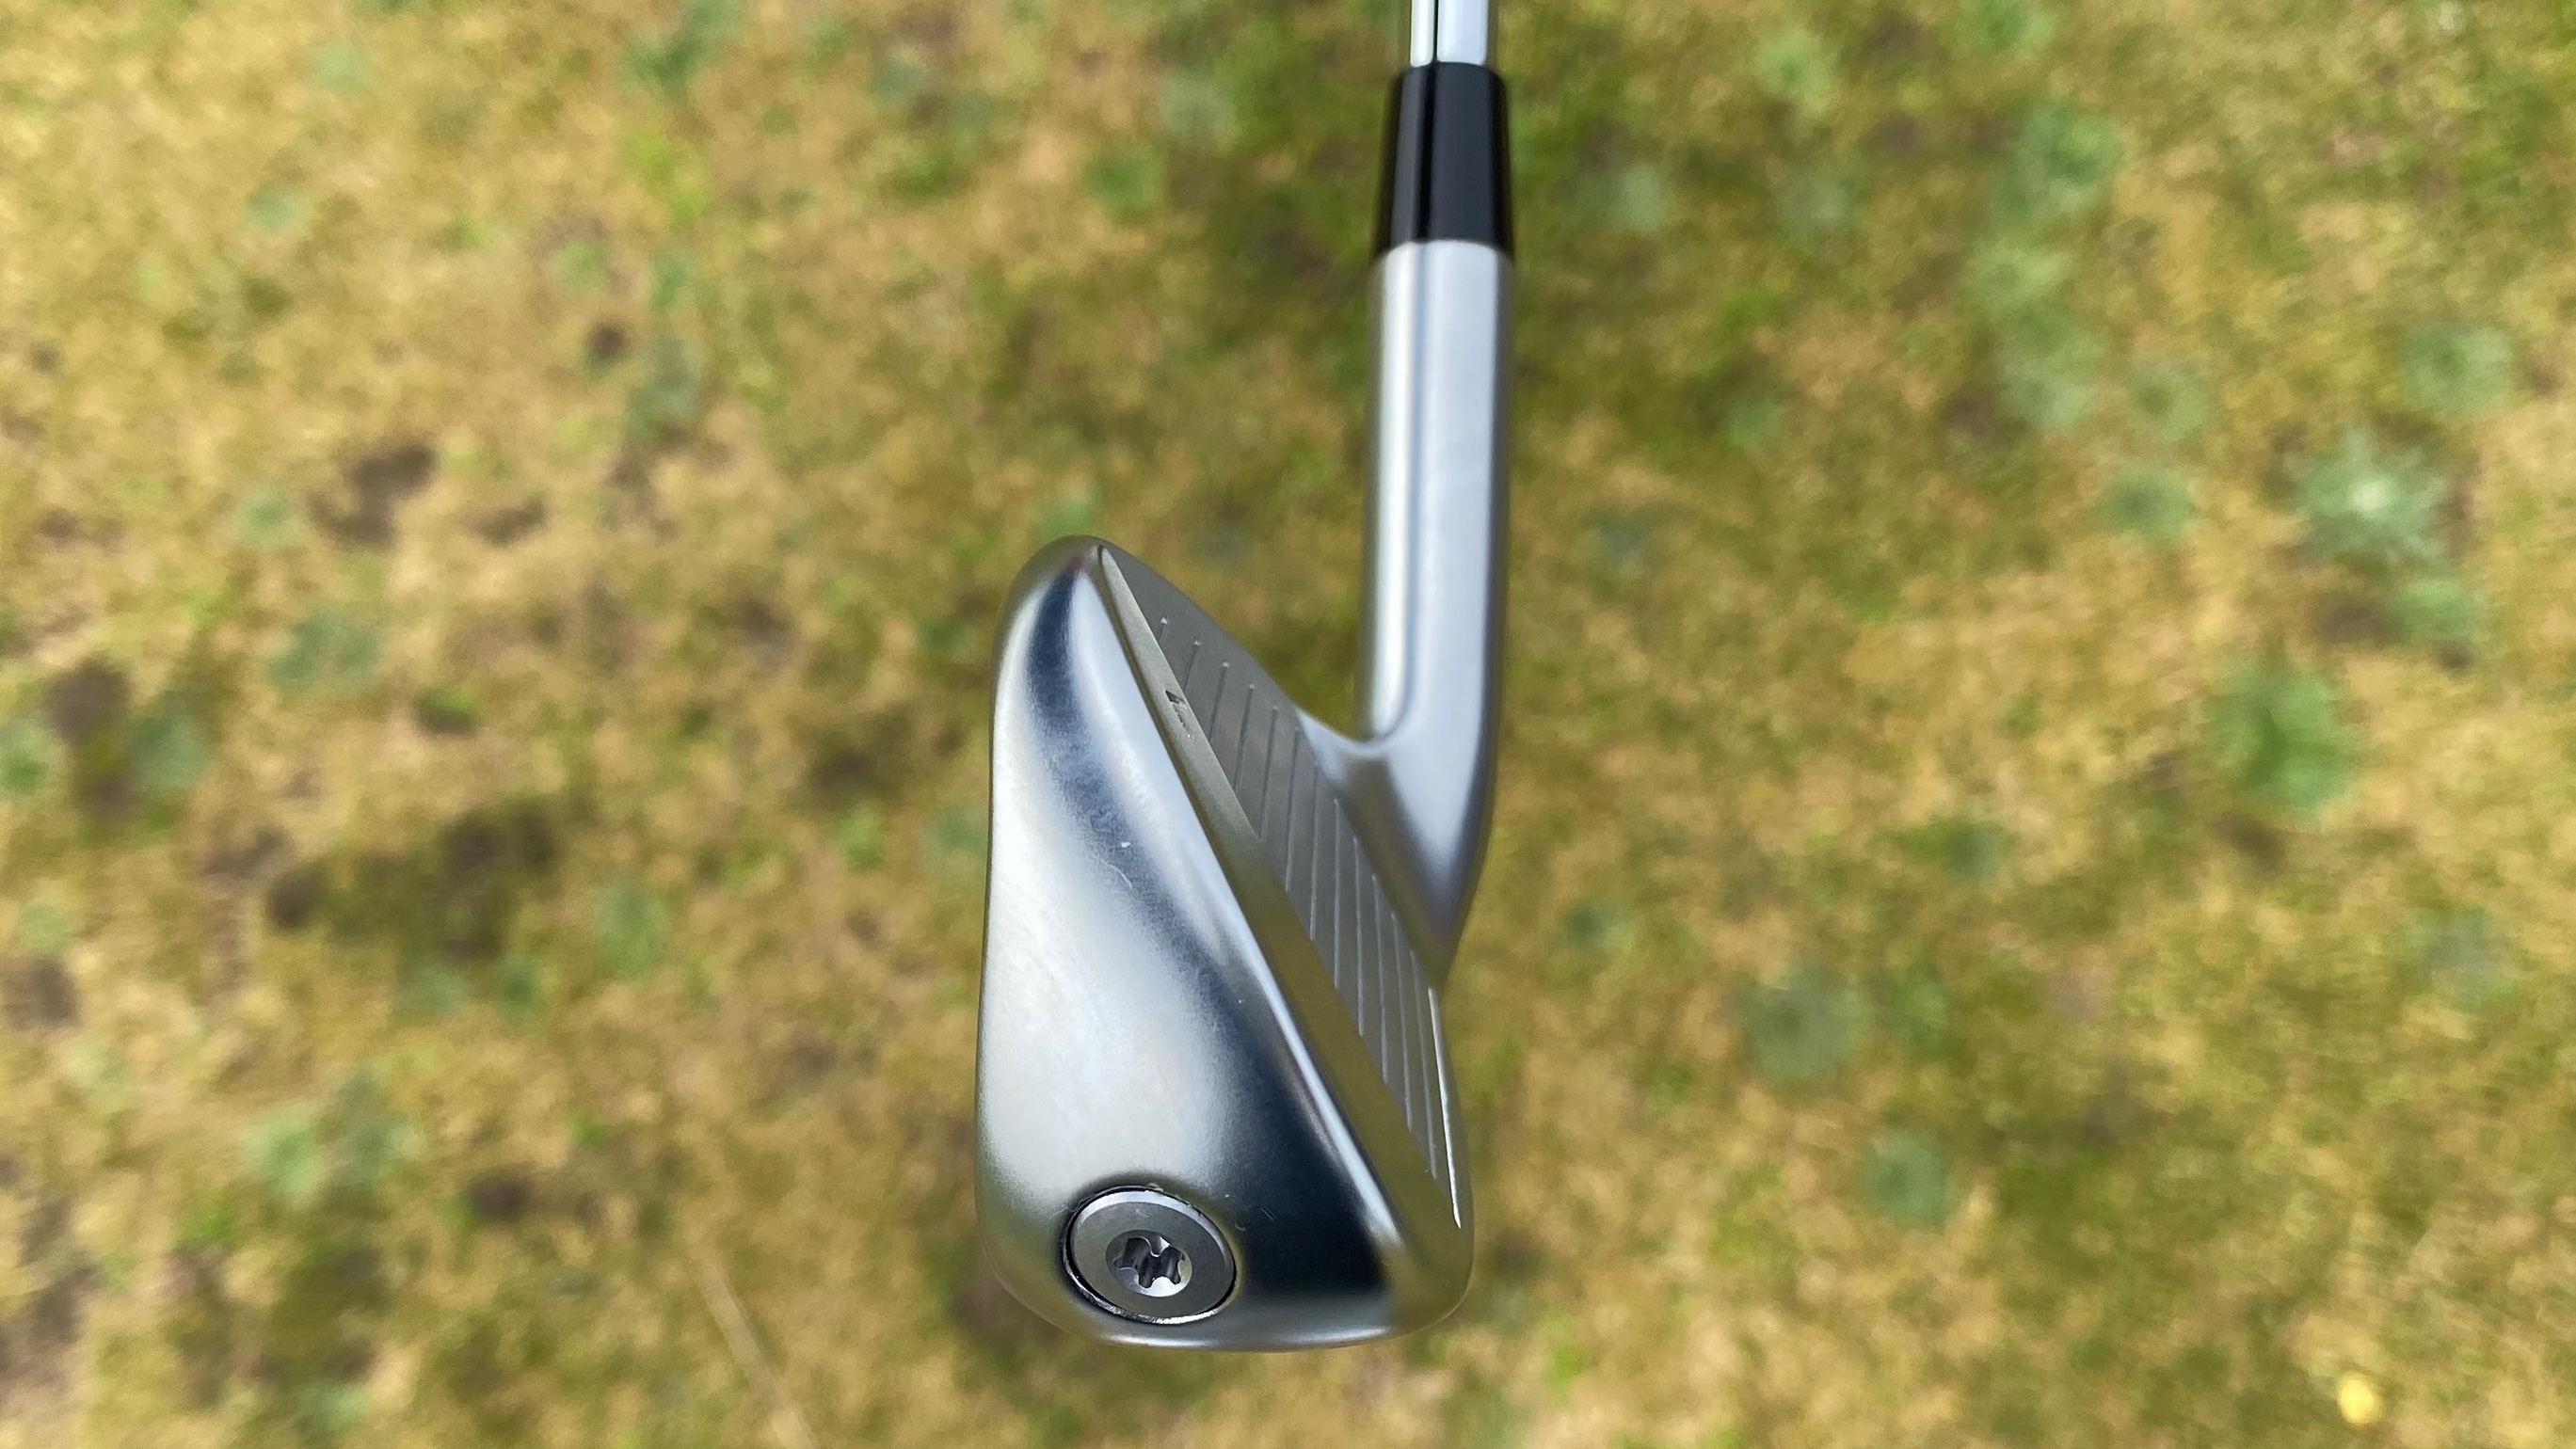 Photo of the Ping G730 Iron